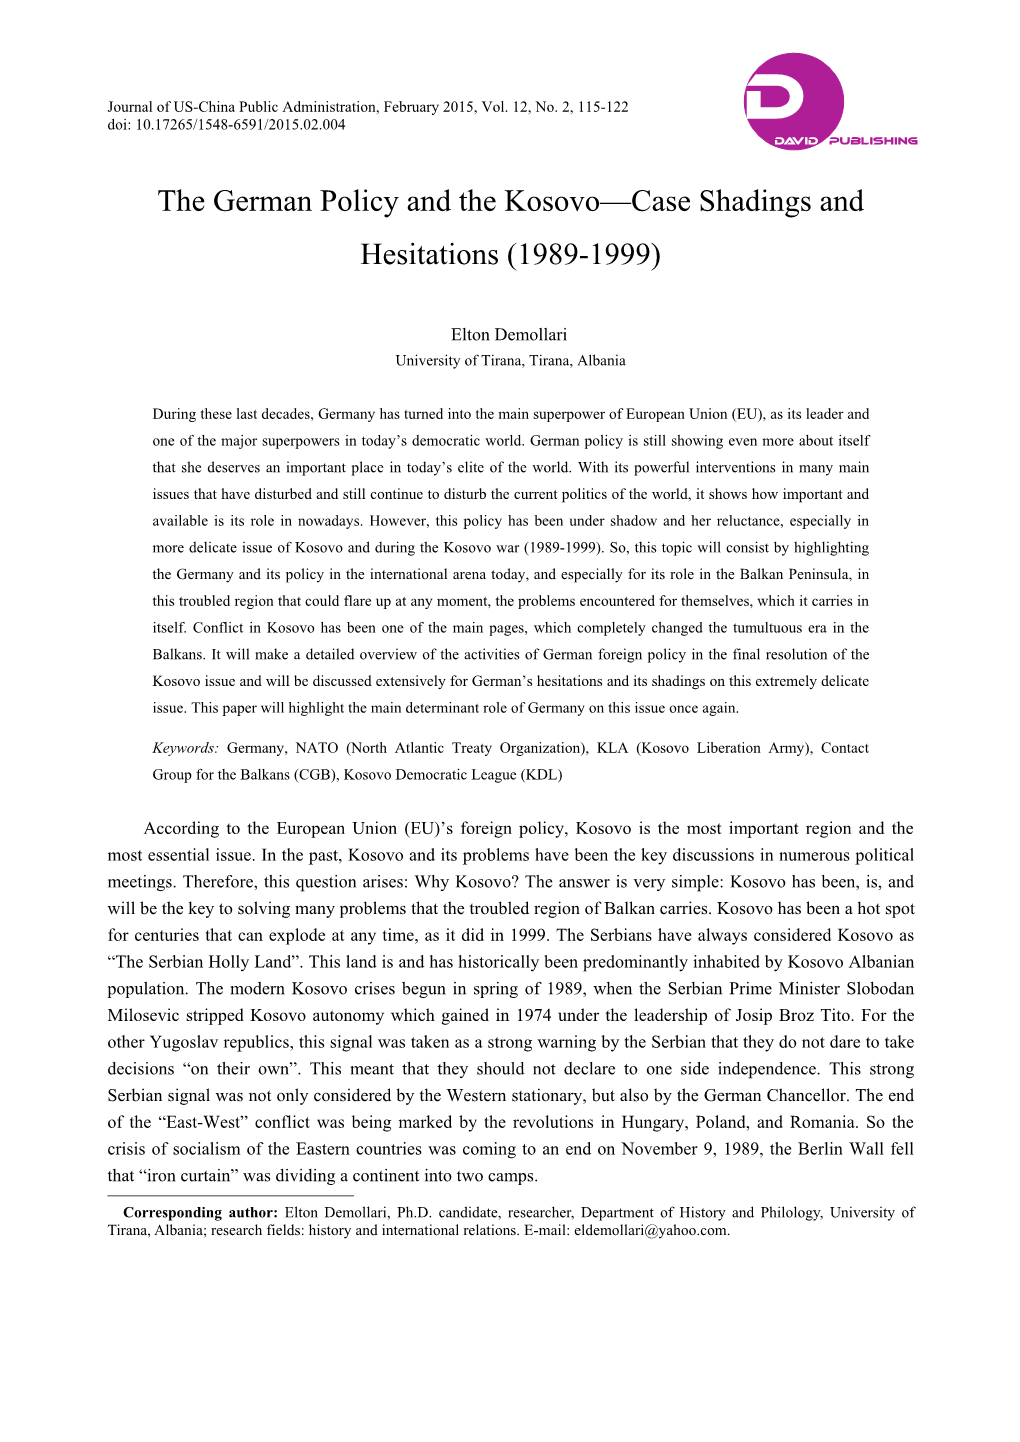 The German Policy and the Kosovo—Case Shadings and Hesitations (1989-1999)